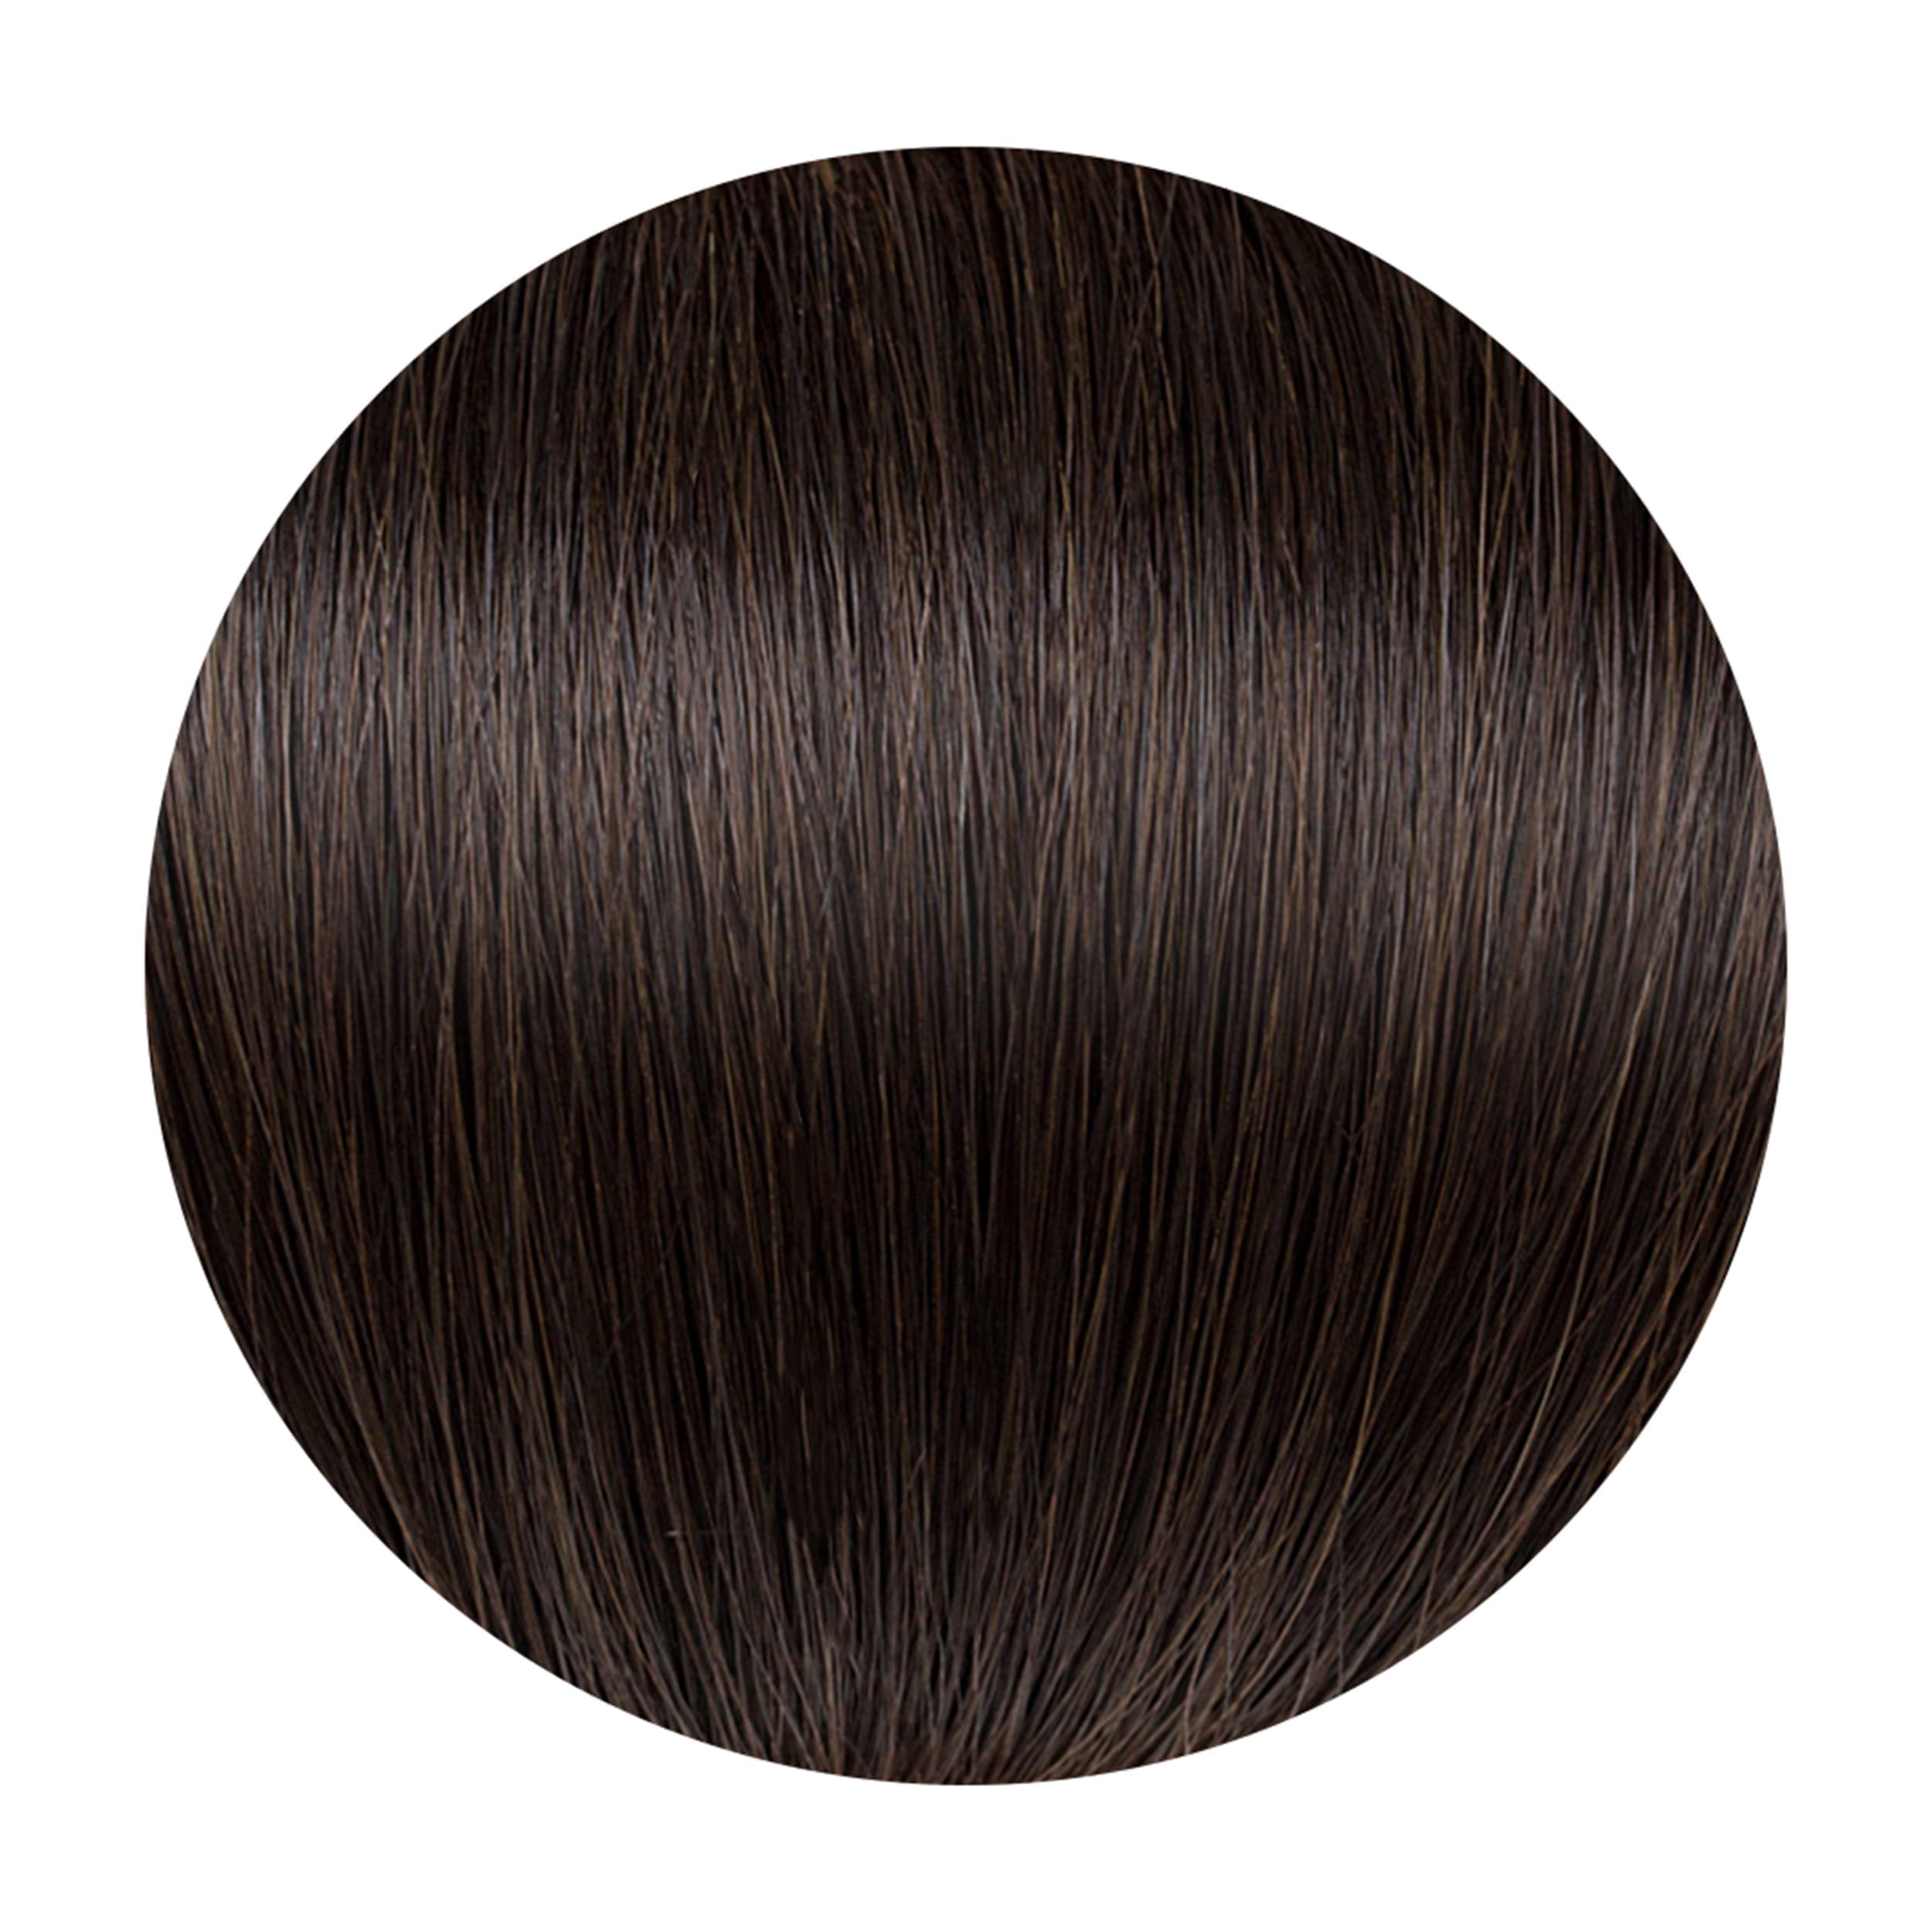 Dark Chocolate Human Hair Extensions Clip in 5 Piece